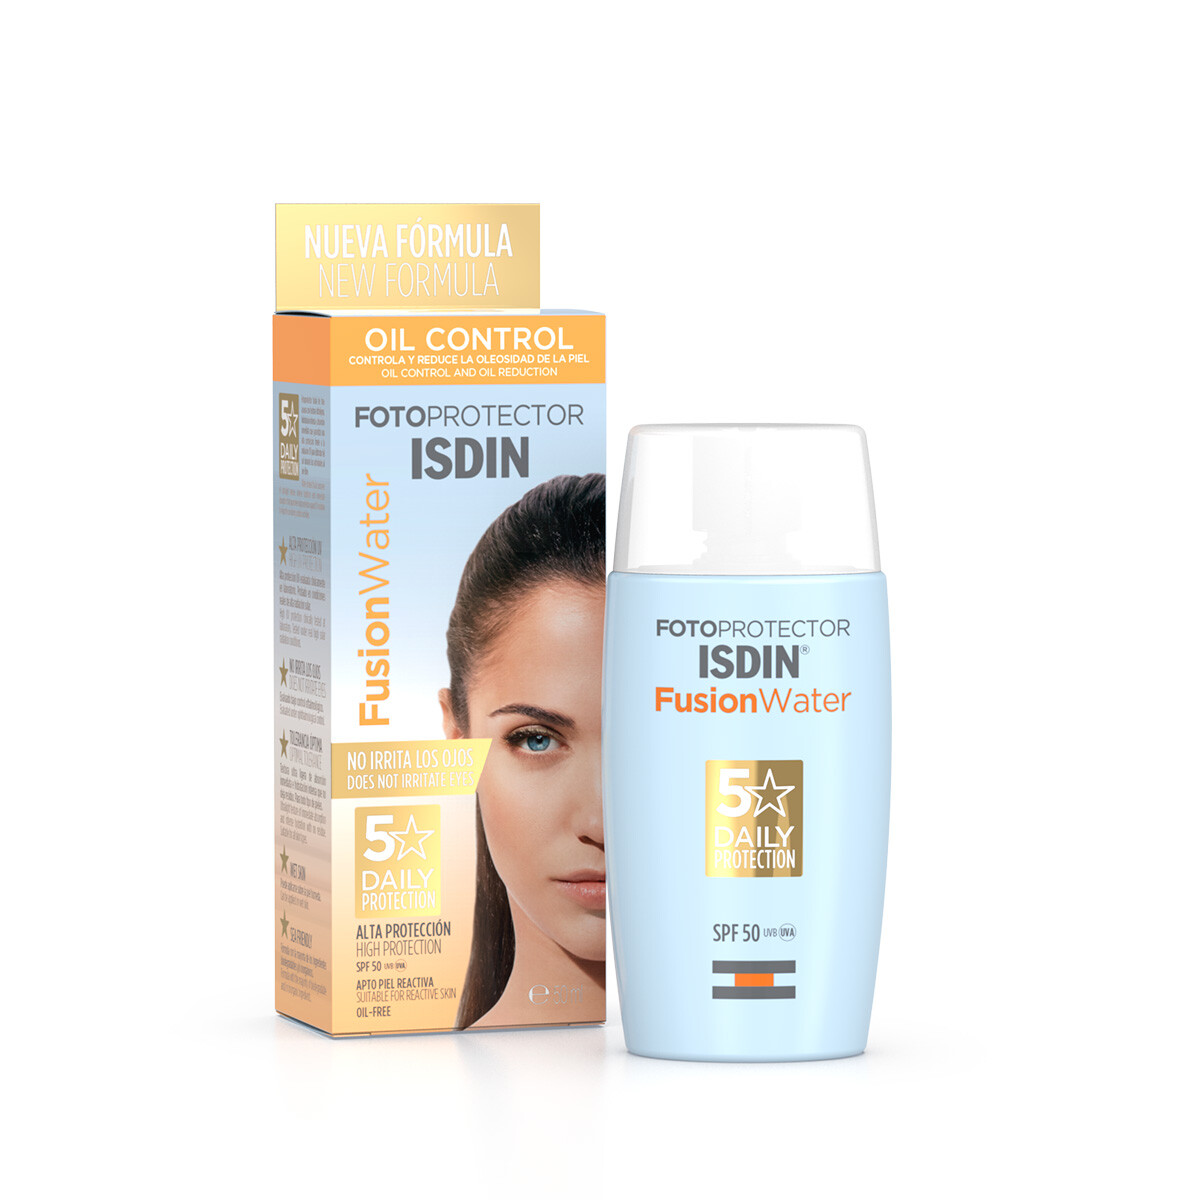 Fotoprotector Fusion Water SPF 50 - ISDIN 